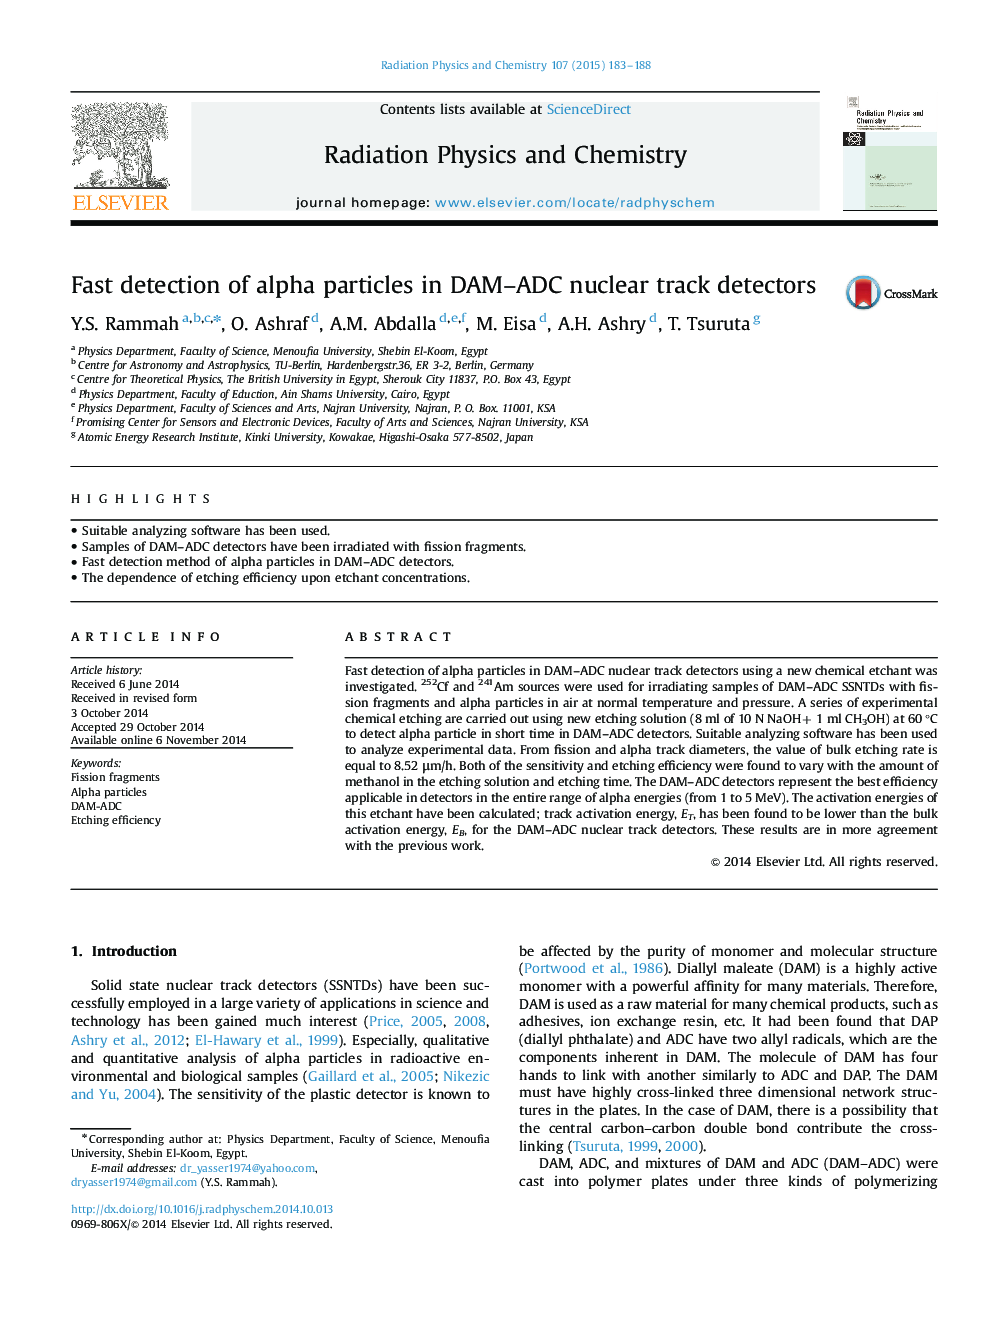 Fast detection of alpha particles in DAM–ADC nuclear track detectors